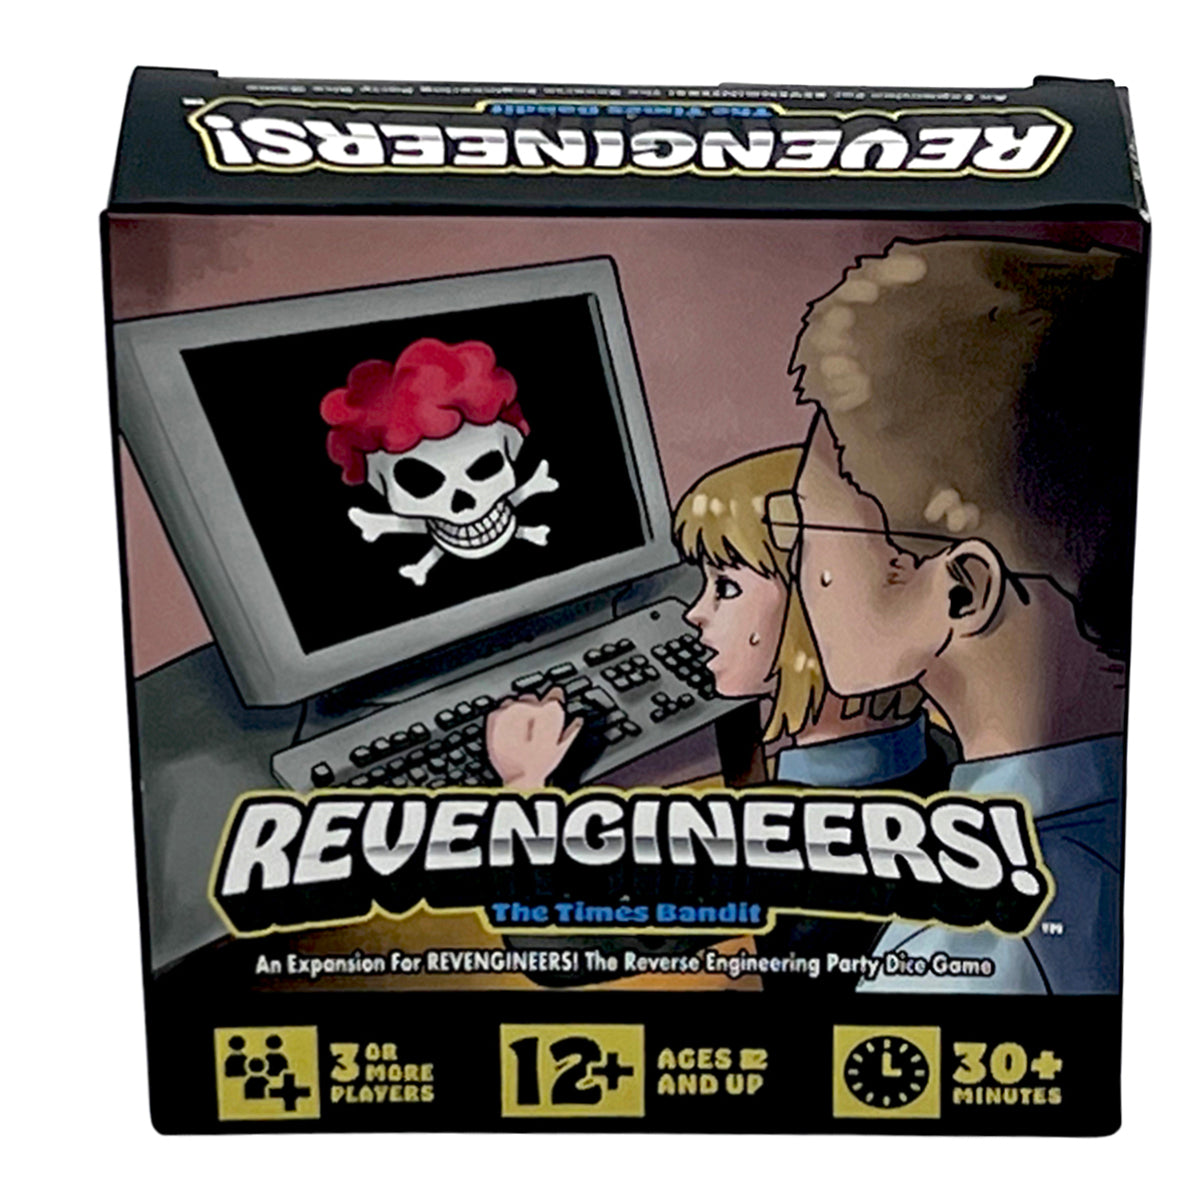 Revengineers! The Times Bandit (Expansion Set)